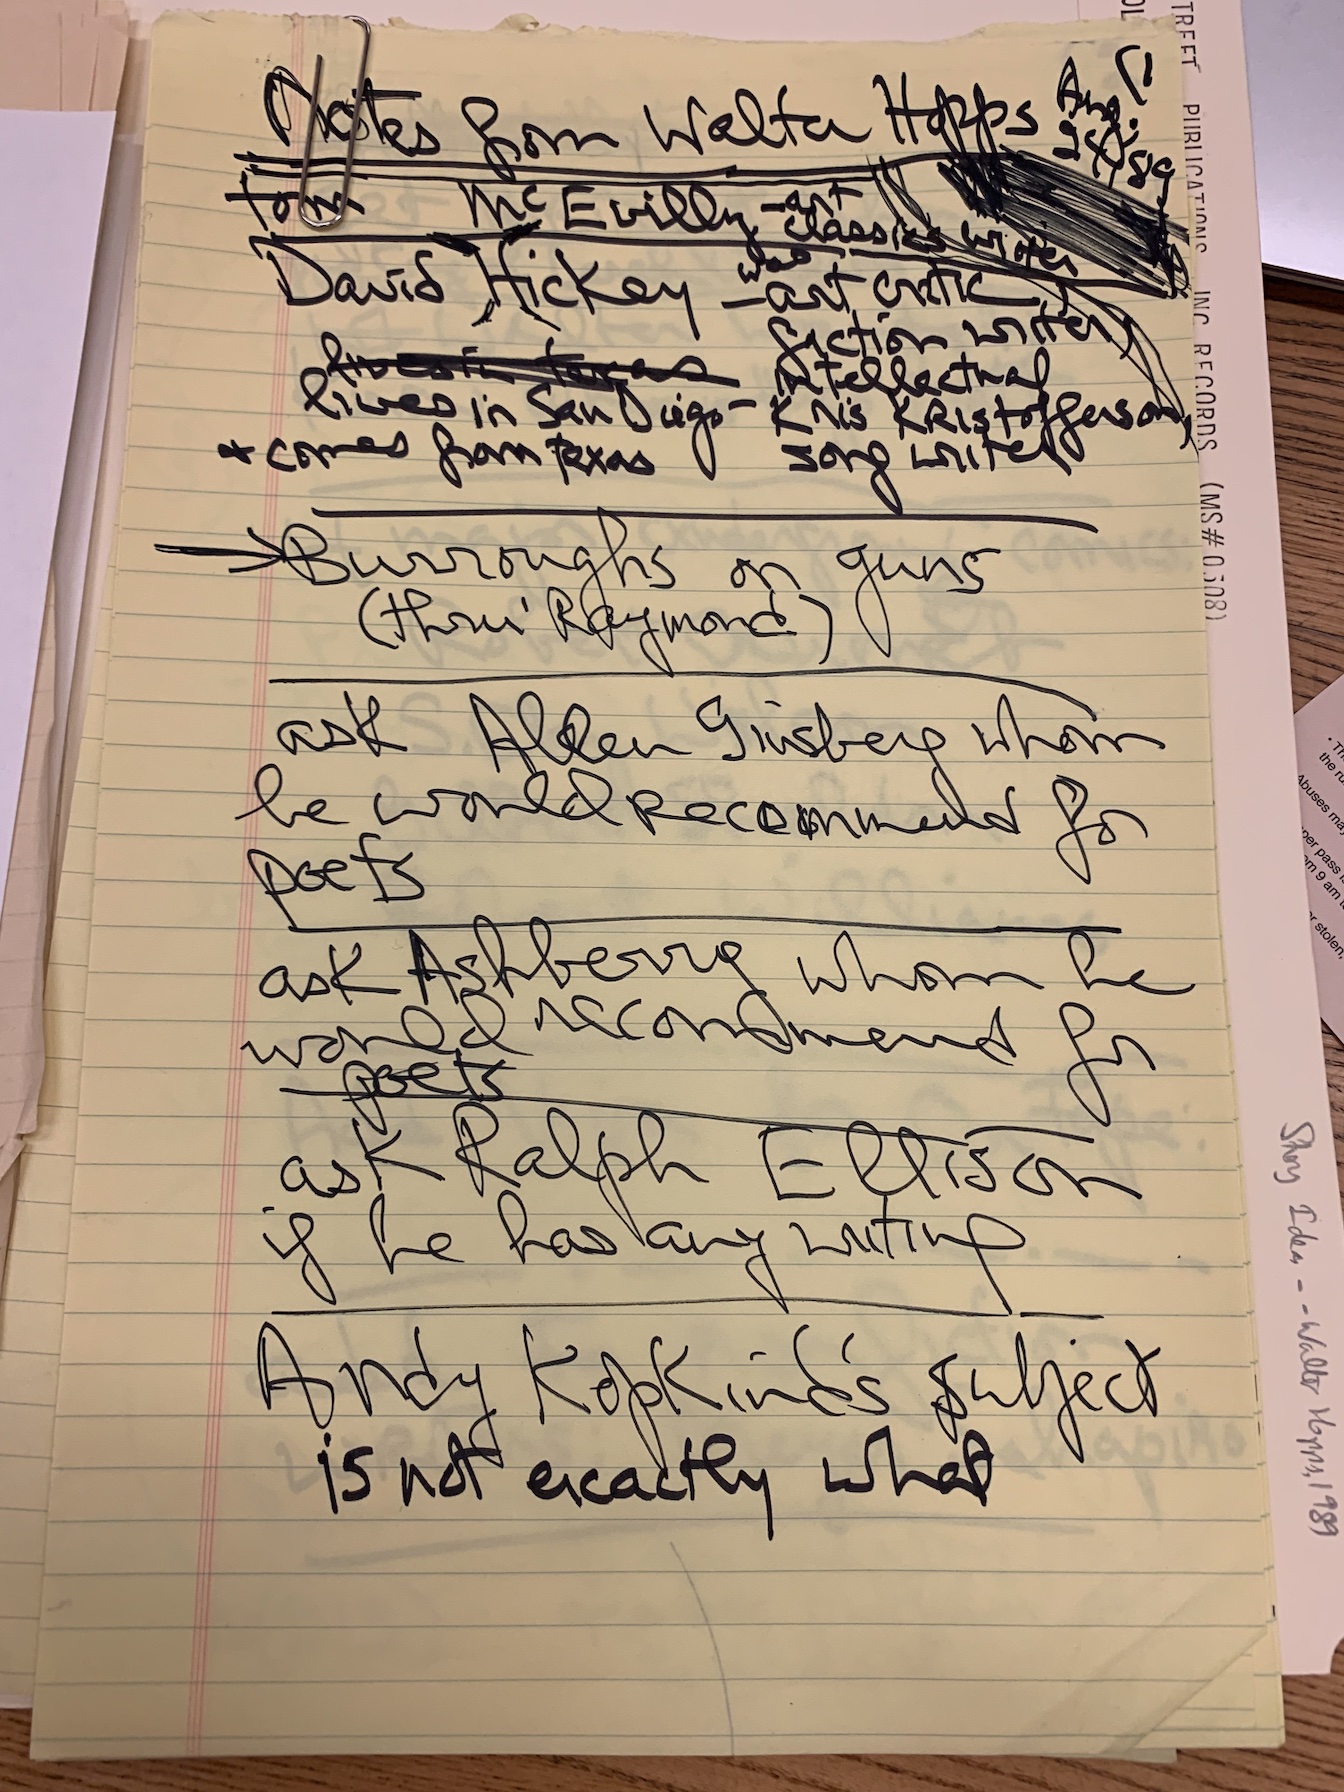 Notes from Walter Hopps in Jean Stein's handwriting (from the Columbia University Grand Street archive)